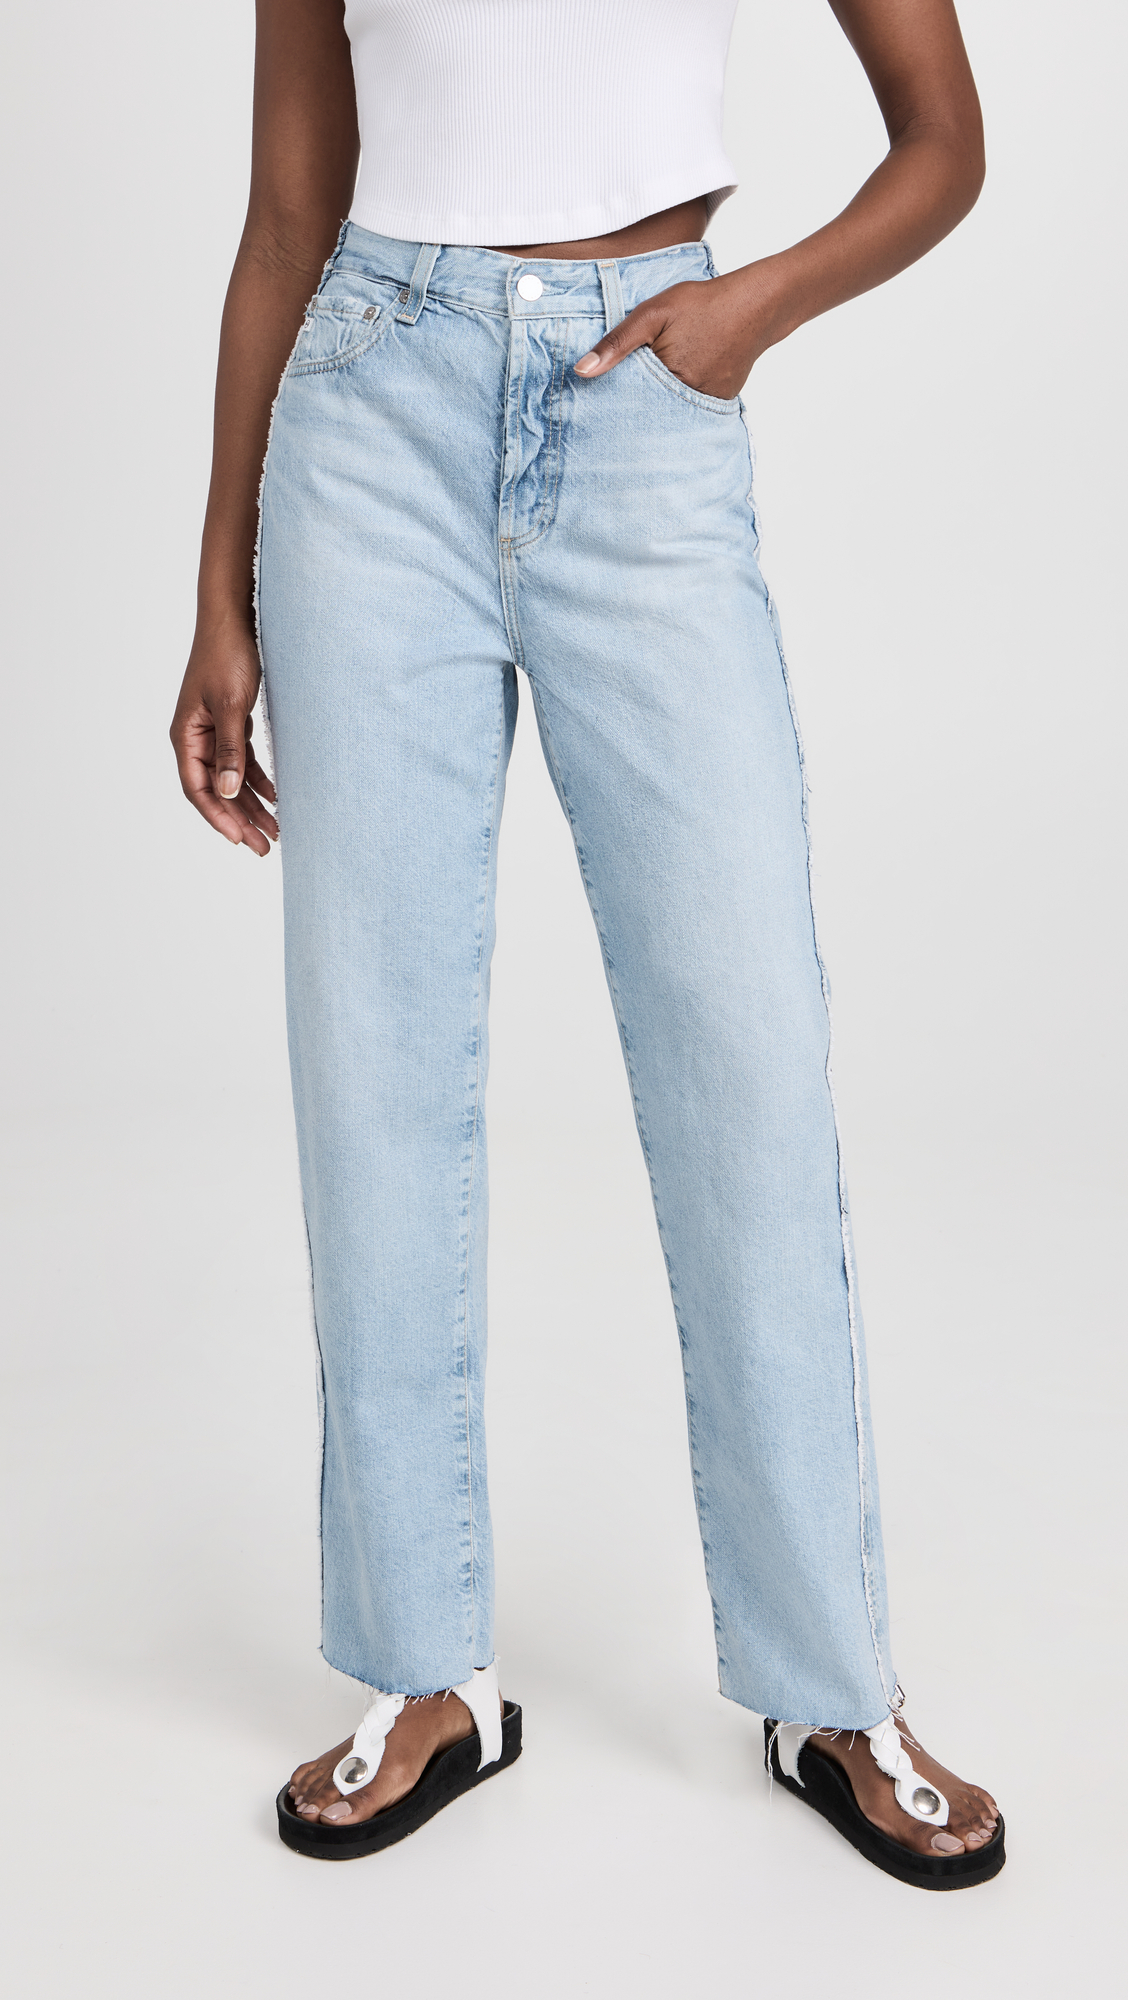 Share more than 124 light blue high waisted jeans best